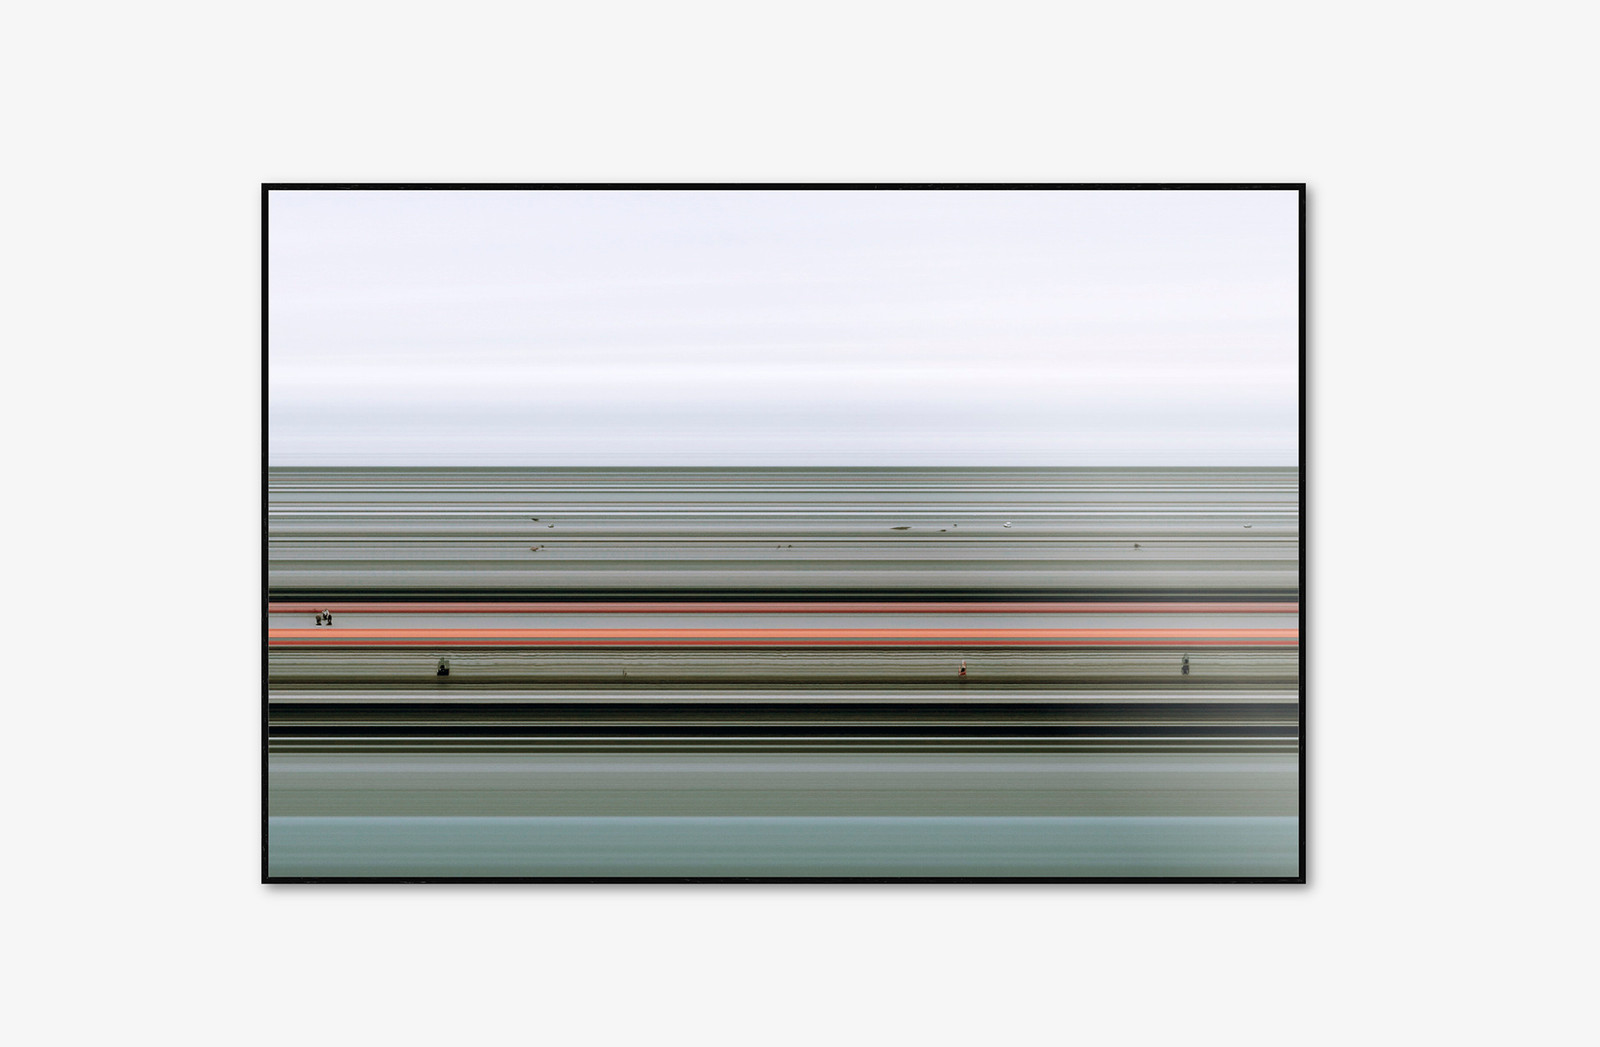 TimeScape No.1 (2019). Multimedia Installation:
Two-channel HD Video (from 4k DCI master), silent, Loop, Dimensions variable.